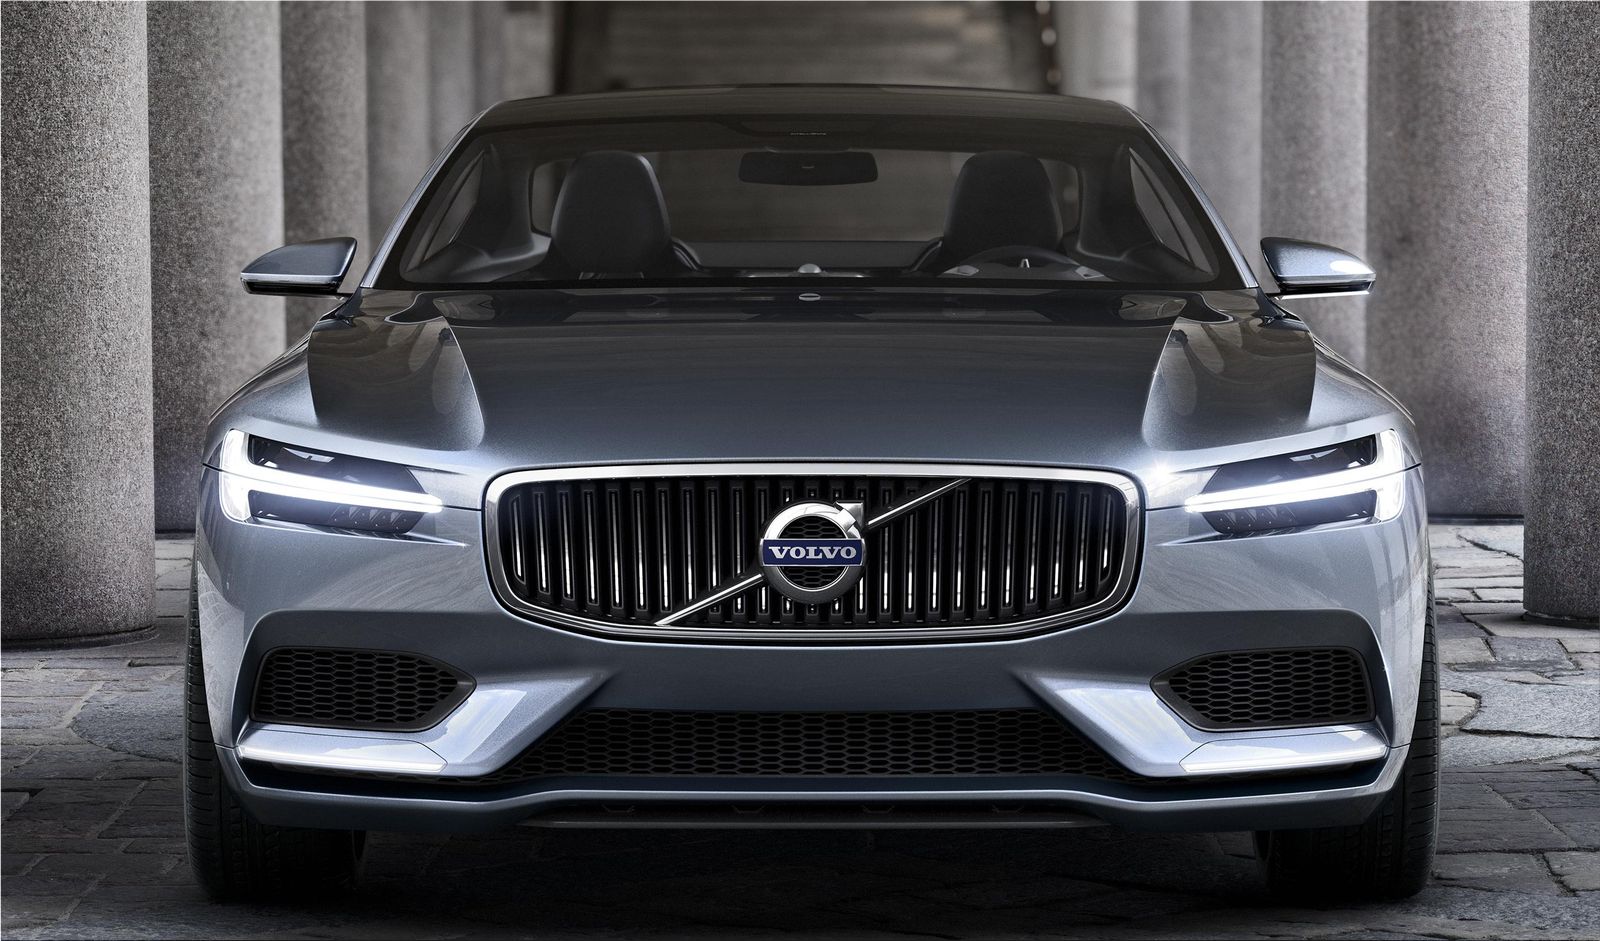 180km/h speed limit on all Volvo cars from 2020|Volvo